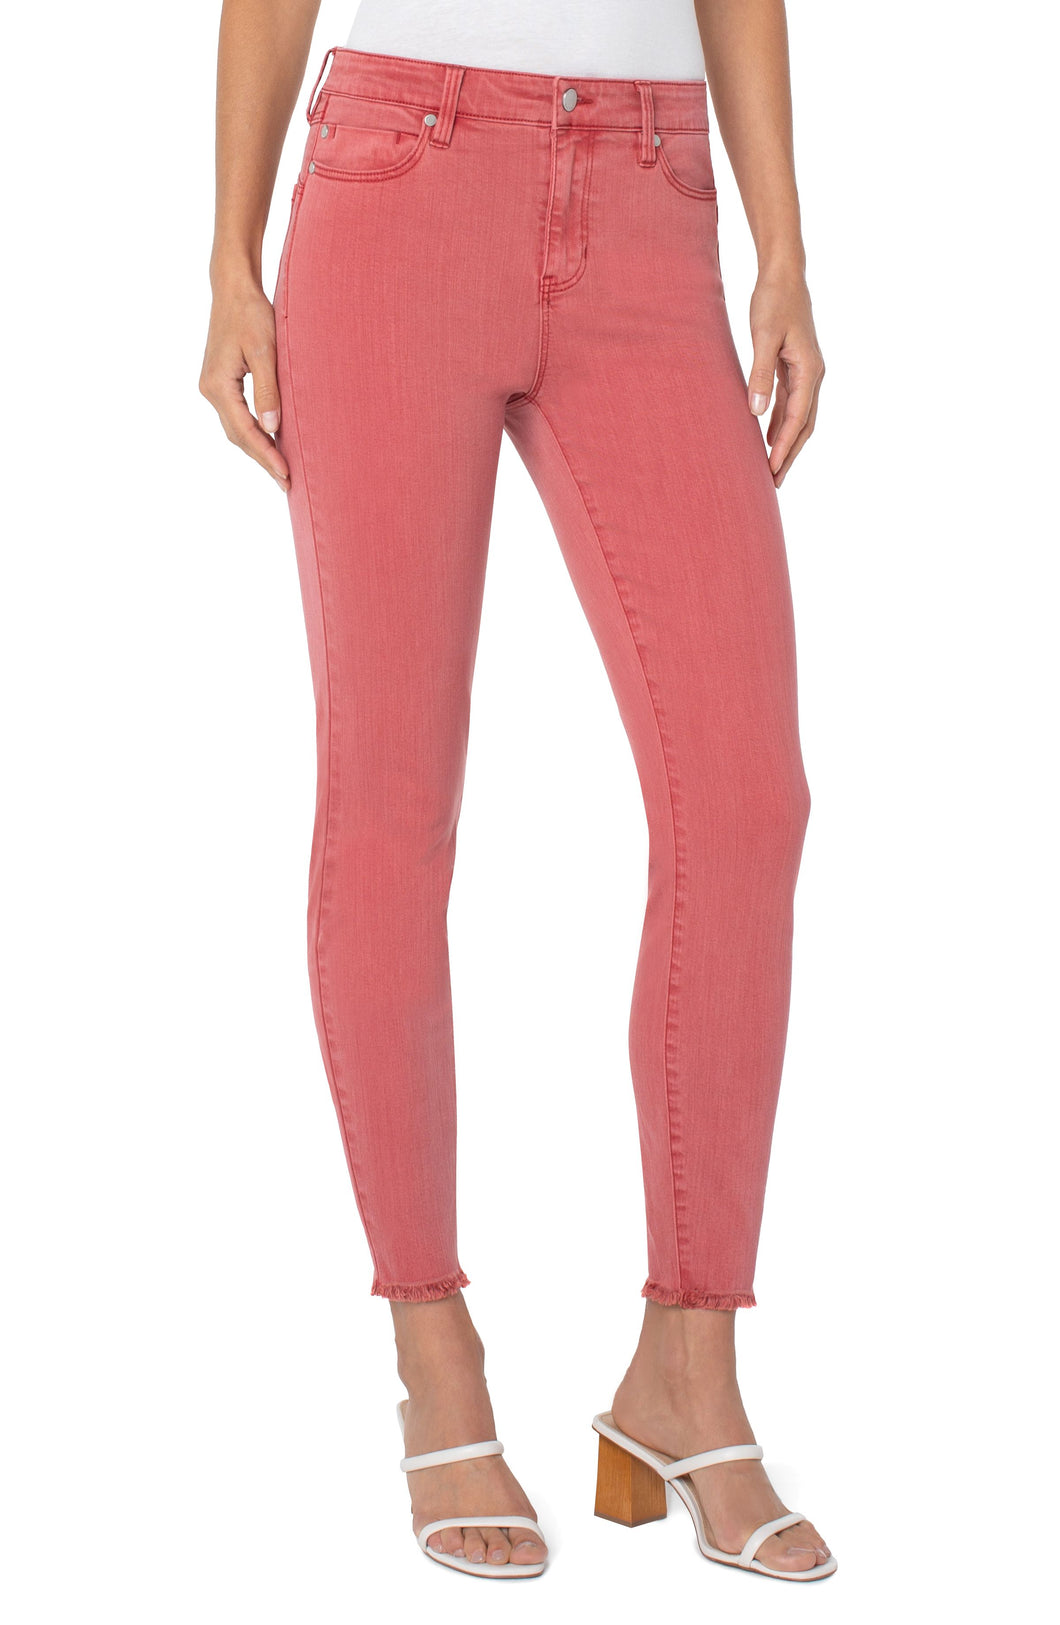 Piper Hugger Colored Ankle Skinny Jeans